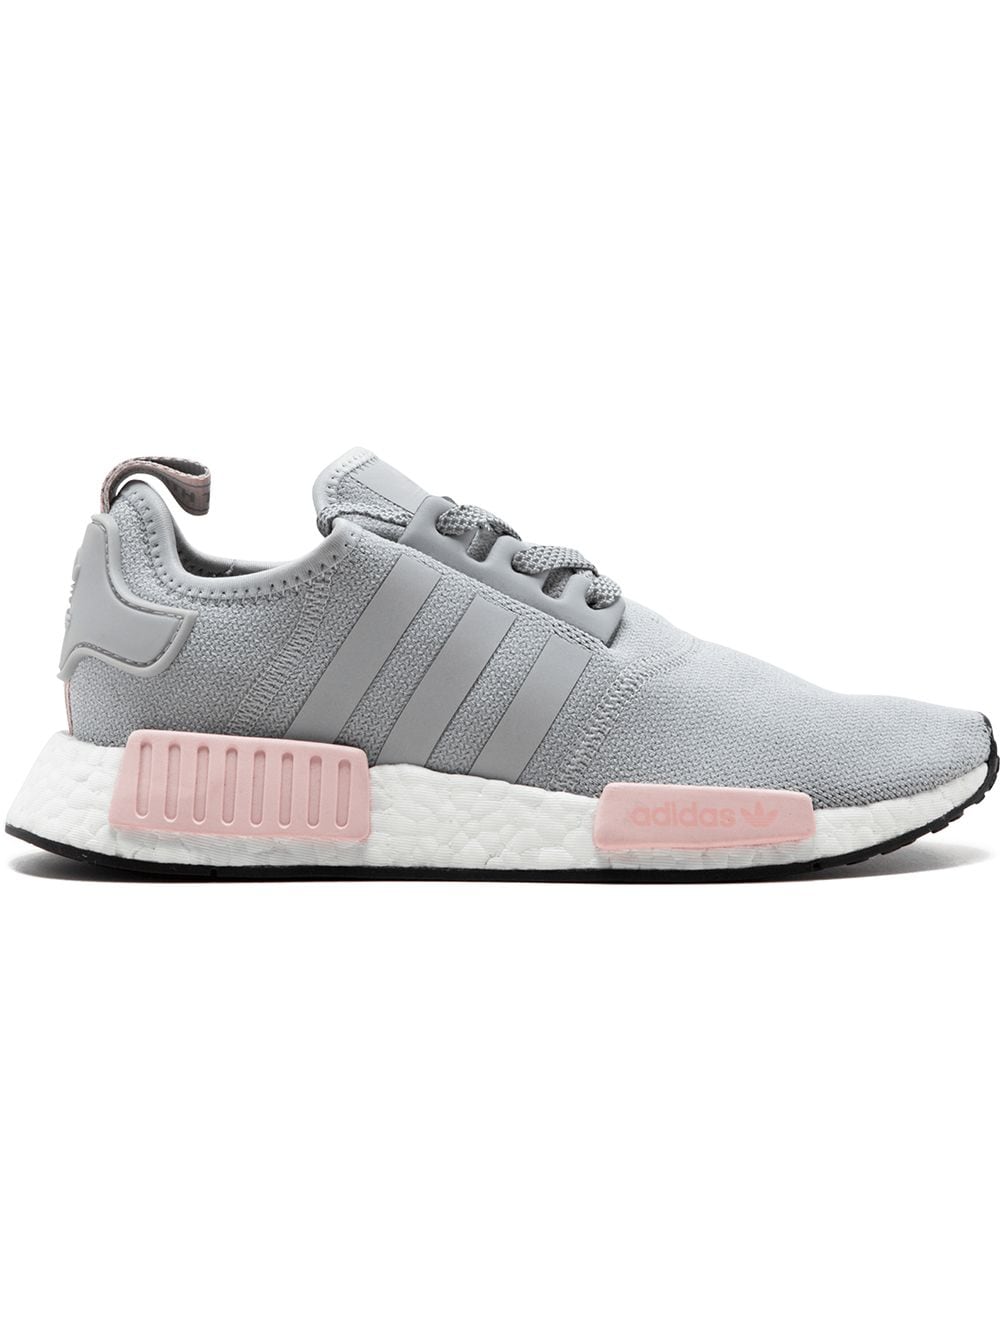 Adidas NMD_R1 low-top Sneakers Farfetch